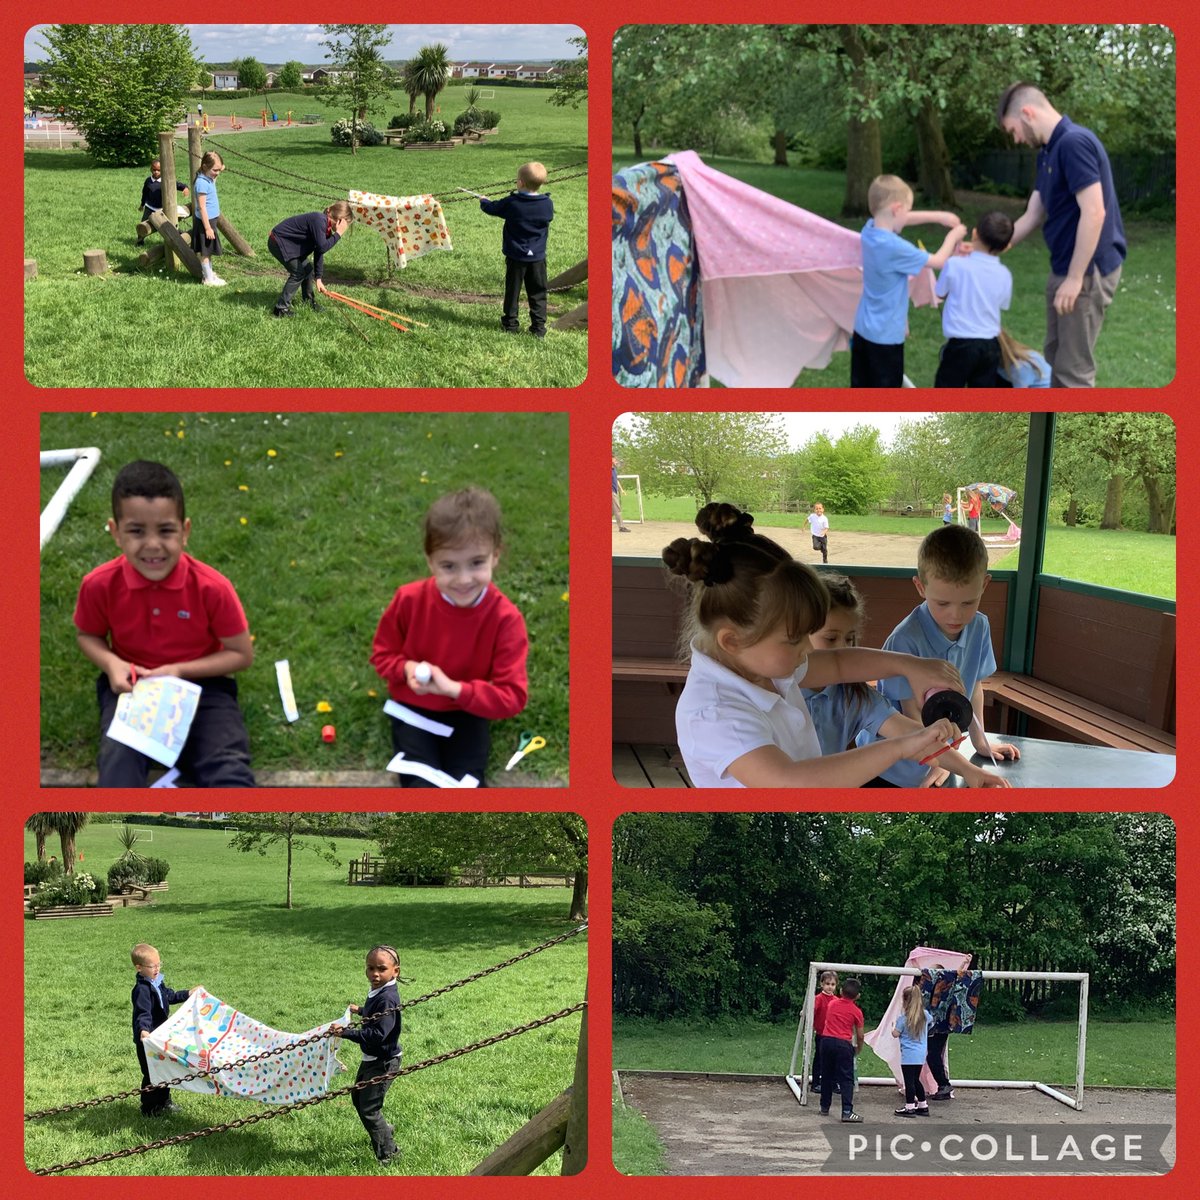 In R.E we learnt about the Jewish festival Sukkot. We worked in teams to create Sukkahs (temporary outdoor shelters) which are built during this week long festival.